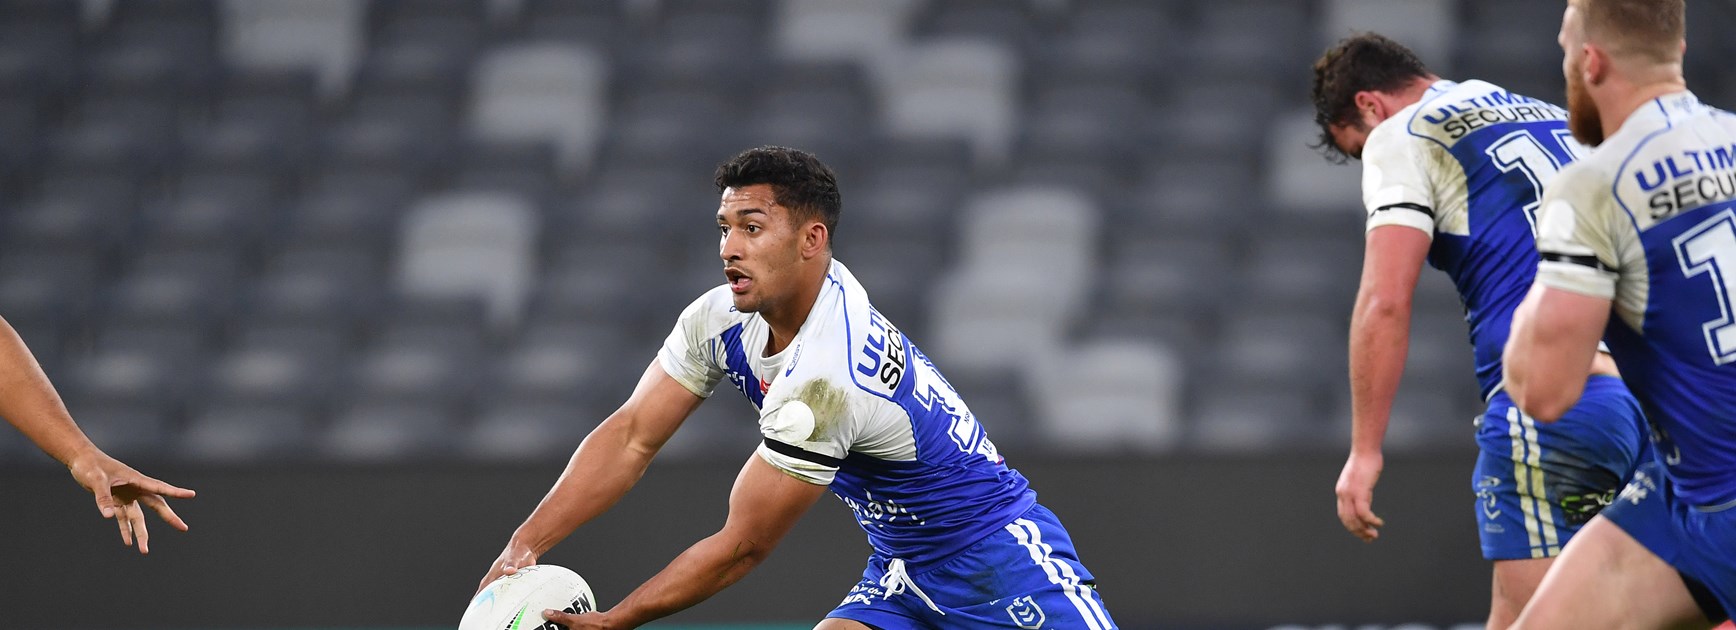 Biondi-Odo burst onto the scene for the Bulldogs in 2021, making his NRL debut in Round 16 before playing 17 games until he ruptured his ACL.